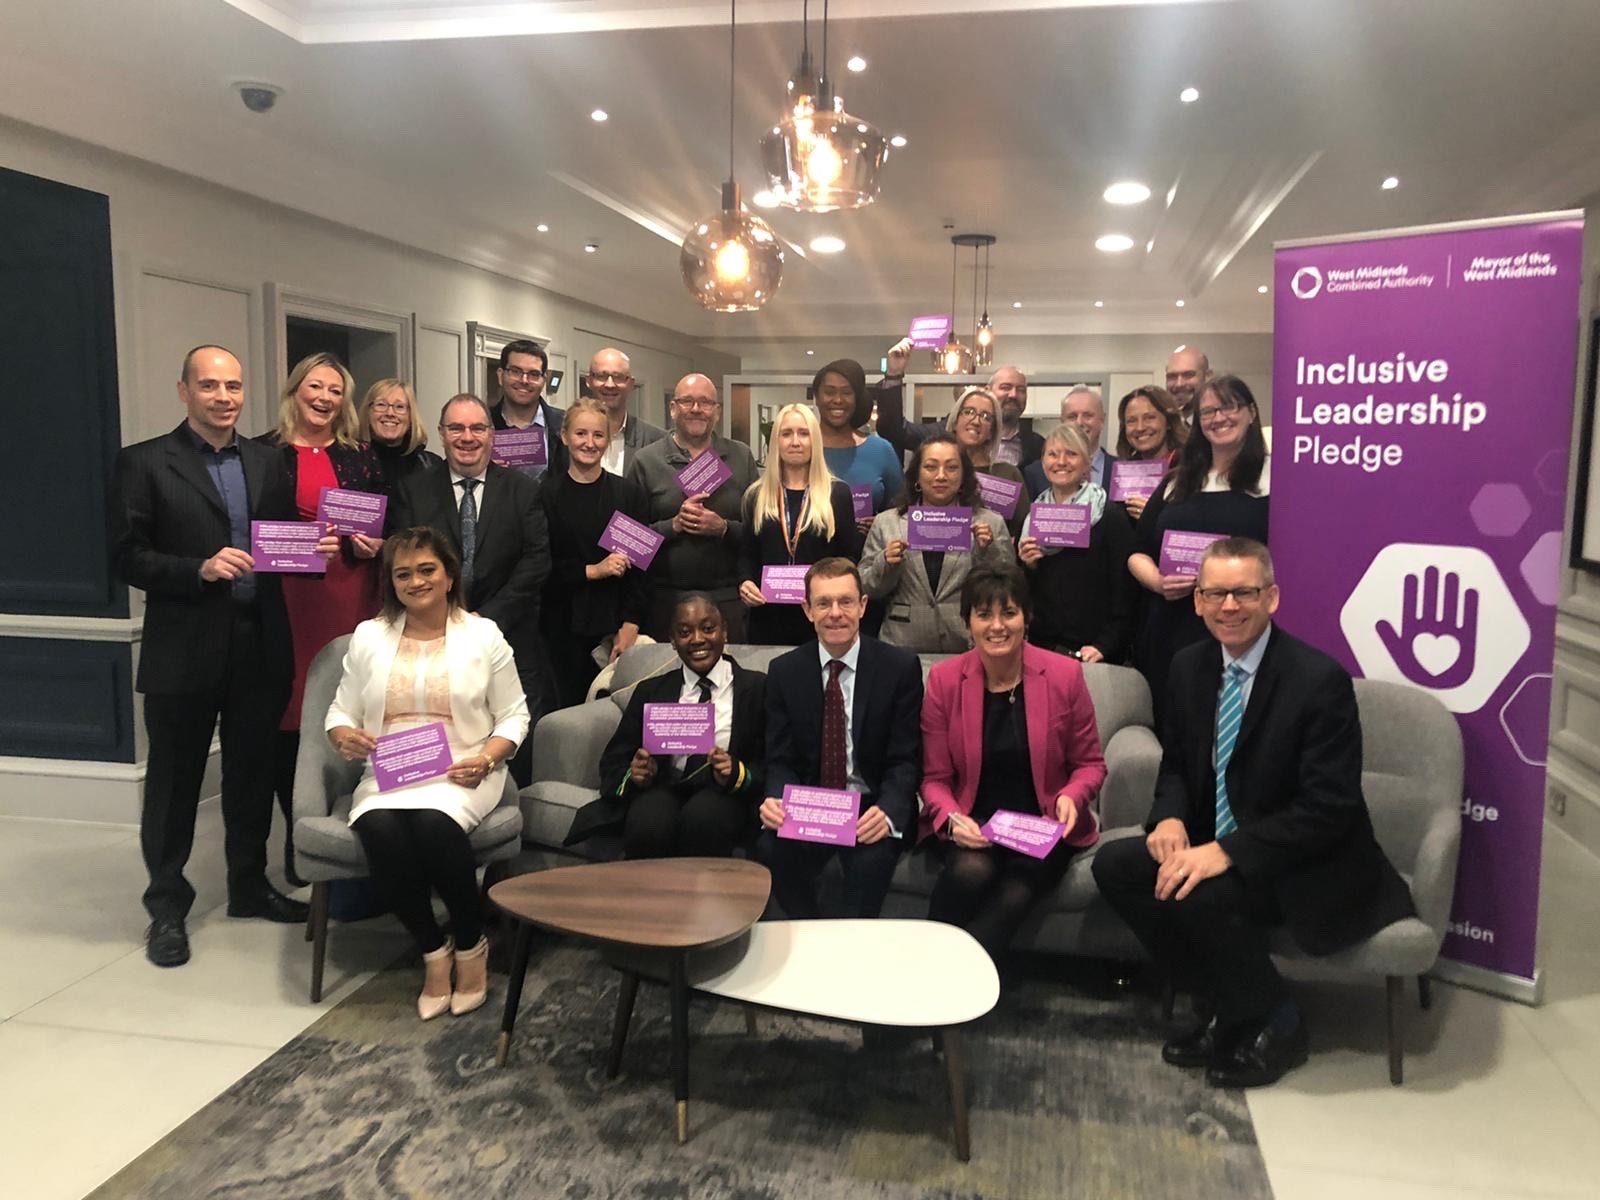 Mayor of the West Midlands Andy Street (front, third from left) is pictured at the event with members of Solihull BID and Solihull Chamber of Commerce, showing their support for the Inclusive Leadership Pledge